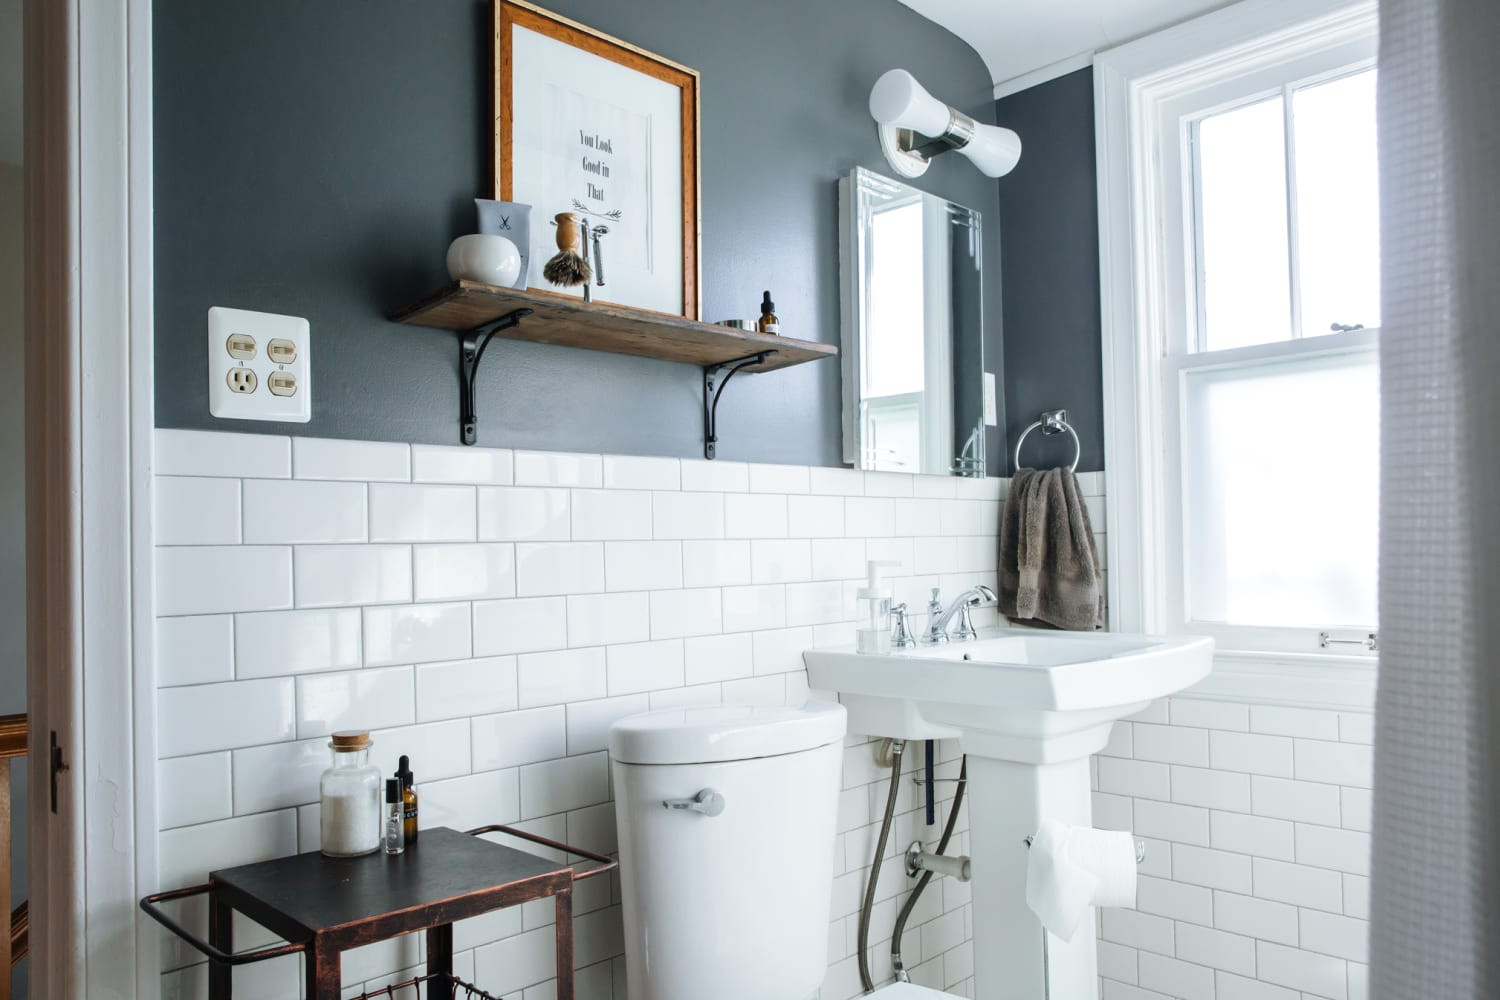 Best Paint For Bathroom Walls
 Best Paint Colors for Small Bathrooms